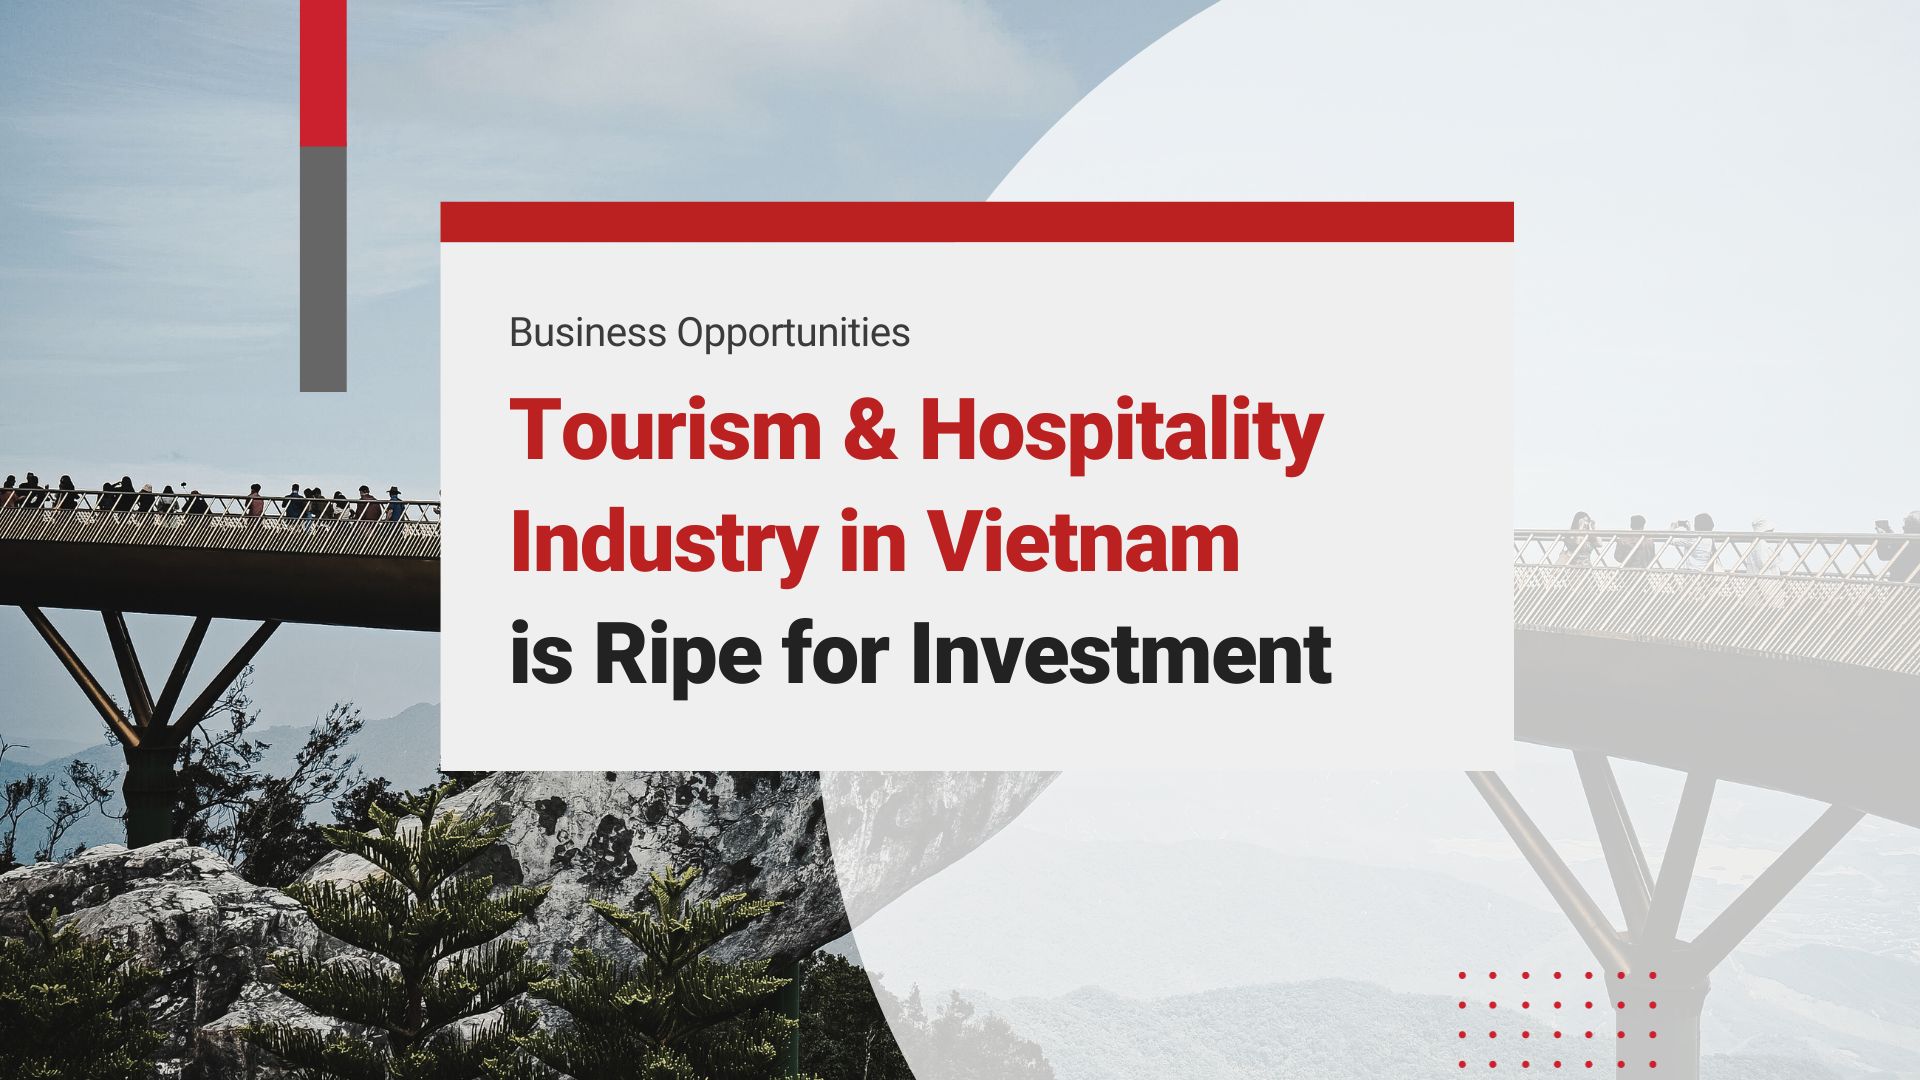 Tourism & Hospitality Industry in Vietnam